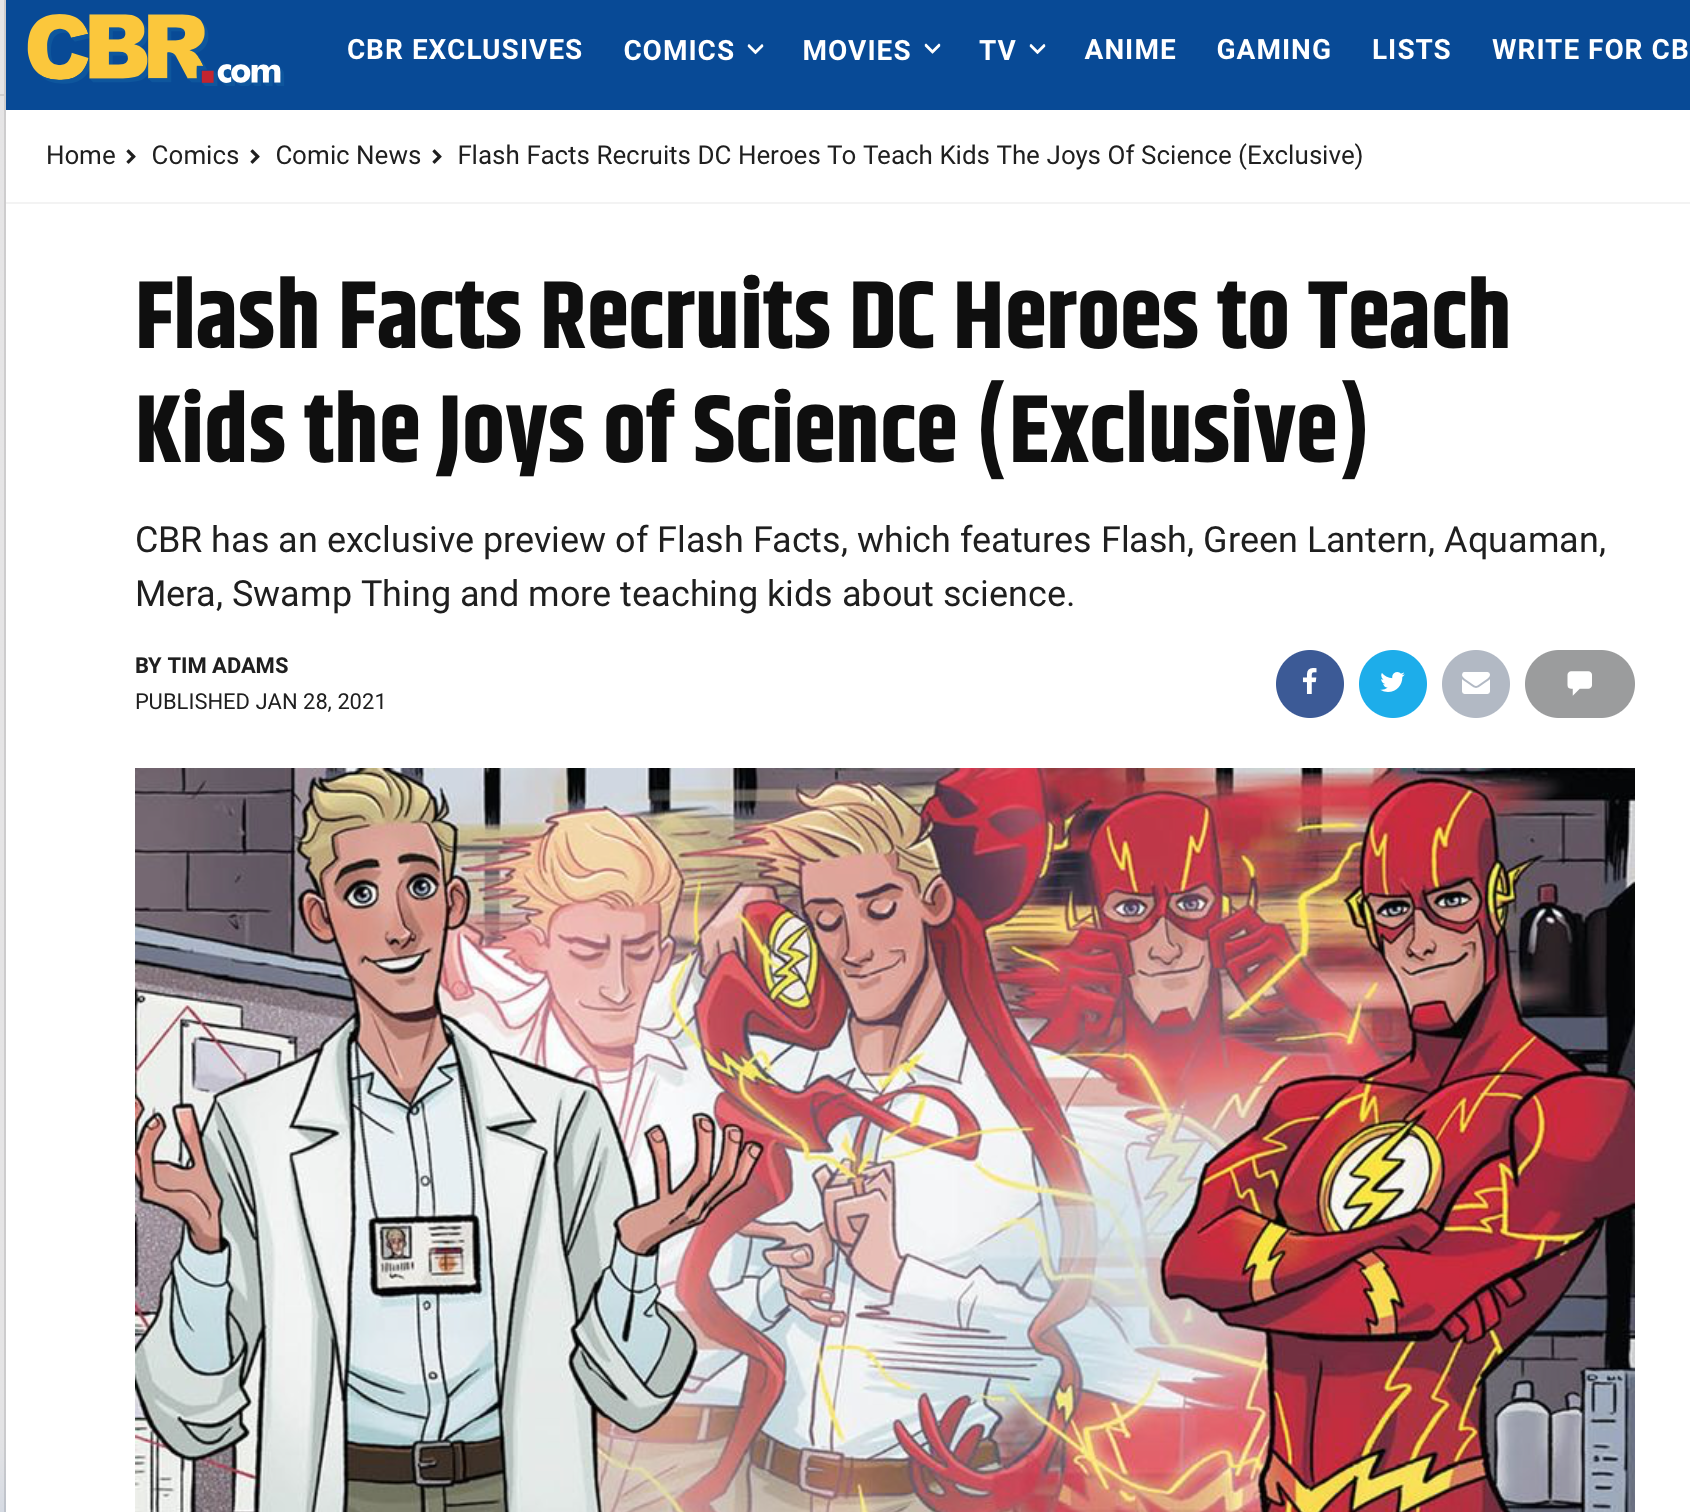 Flash Facts Recruits DC Heroes to Teach Kids the Joys of Science (Exclusive)